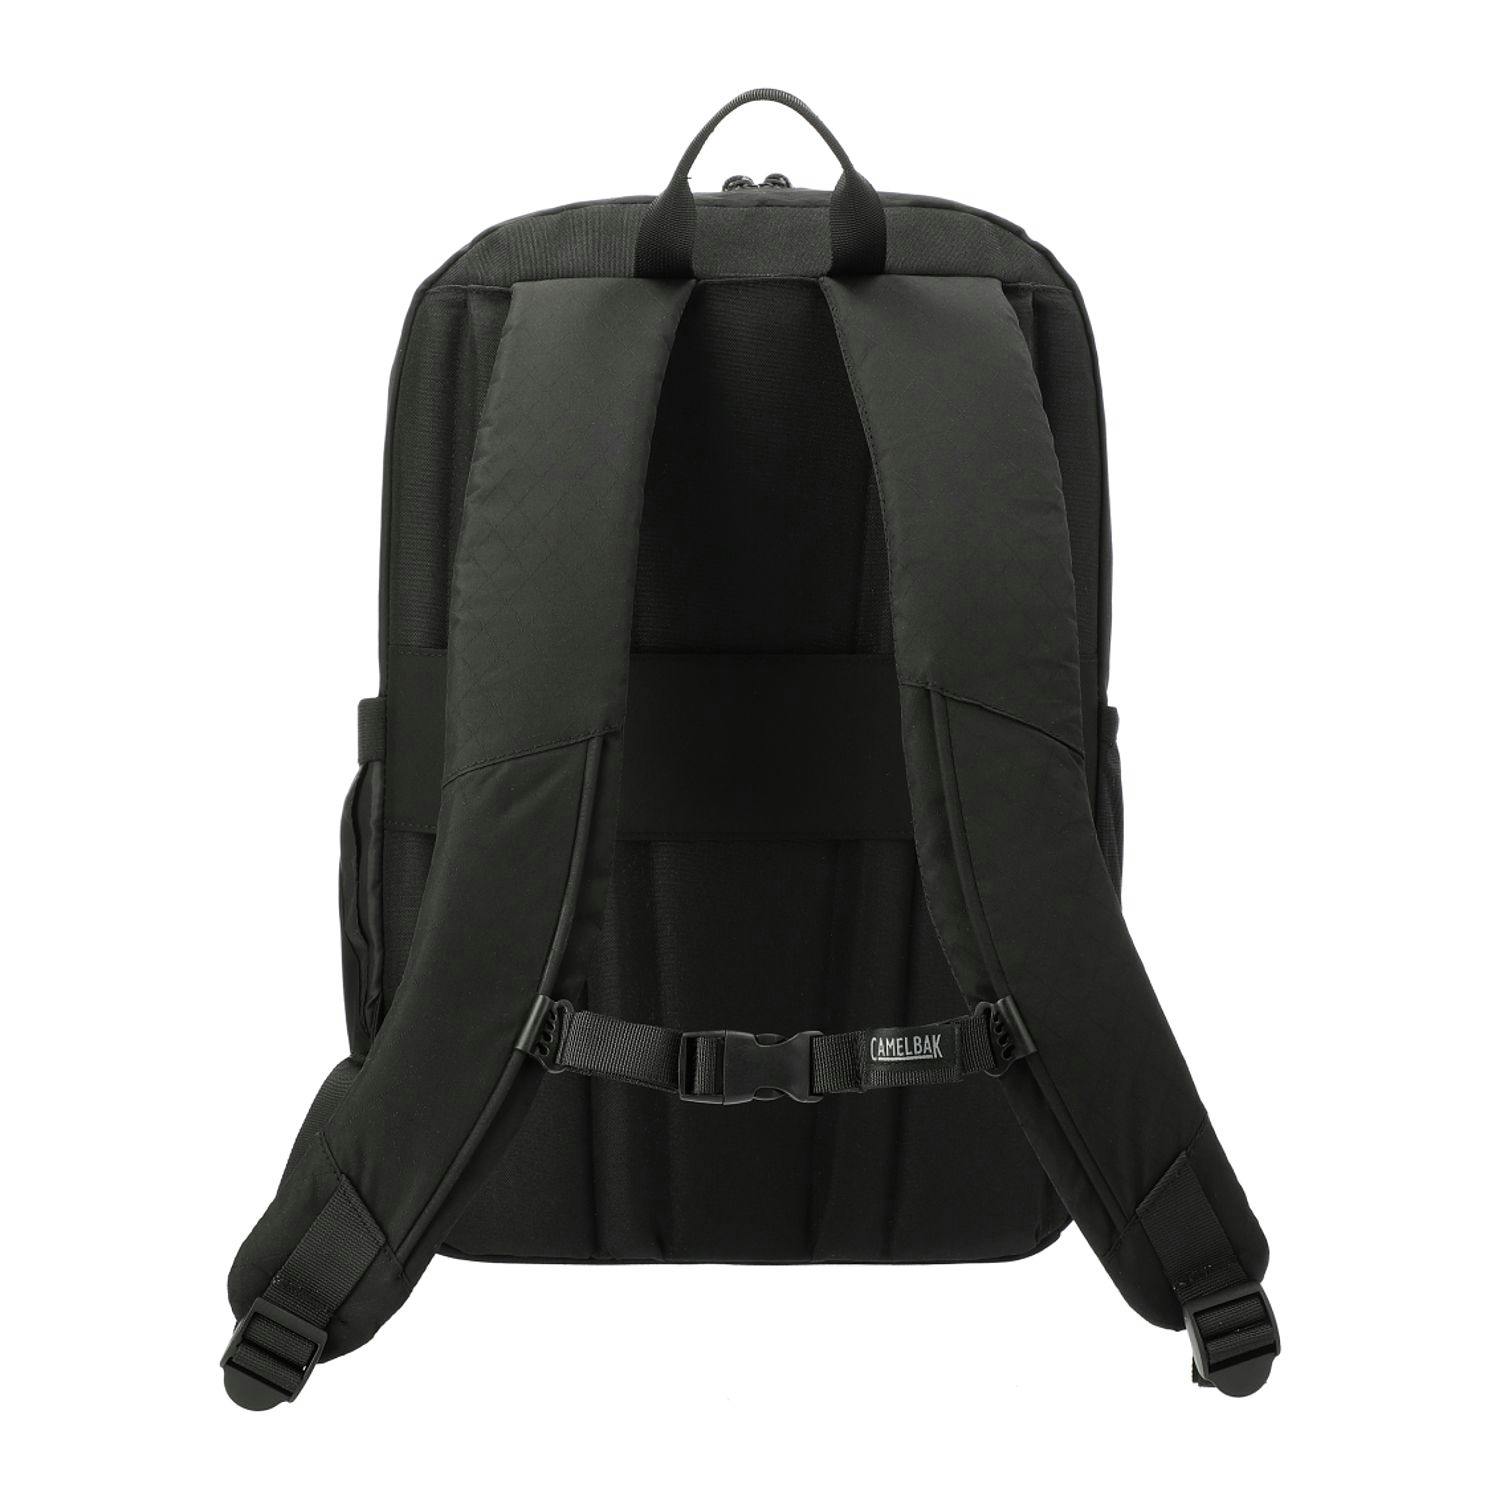 CamelBak LAX 15" Computer Backpack - additional Image 1